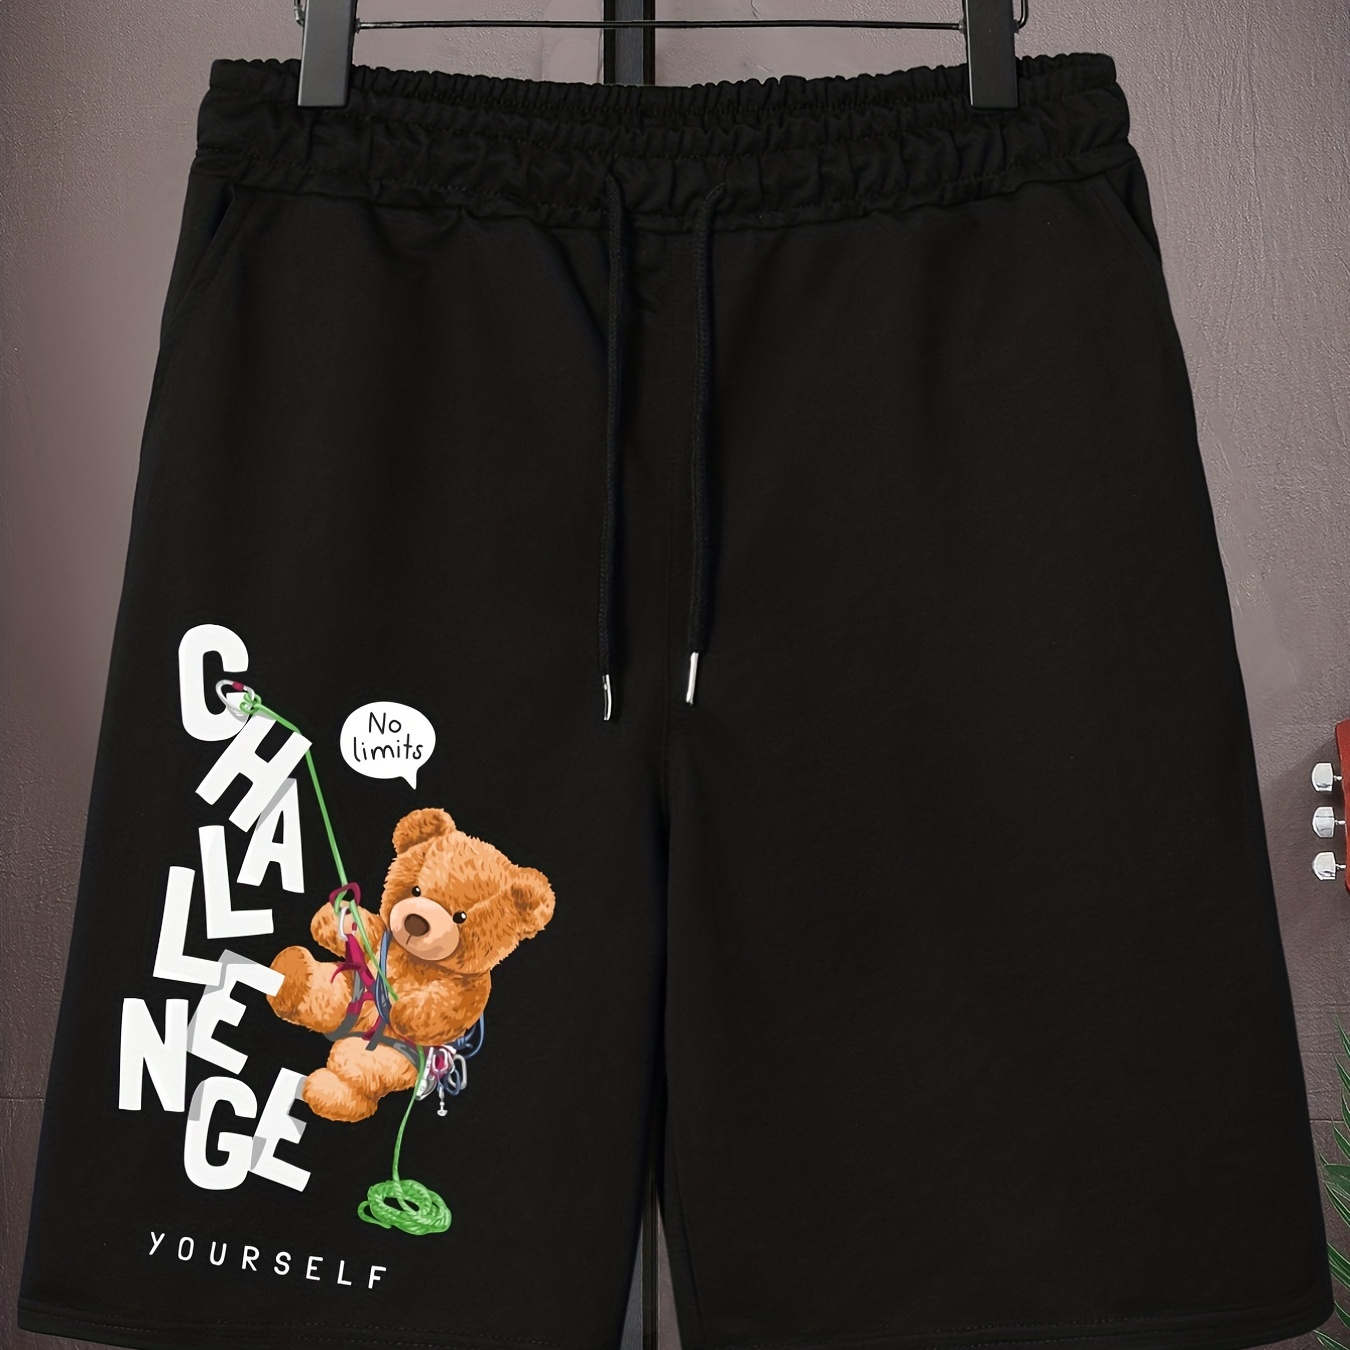 

Men's Plus Size Drawstring Shorts, Cartoon Bear & Challenge Yourself Print Oversized Elastic Short Sports Pants For Big And Tall Guys, Spring & Summer Wear